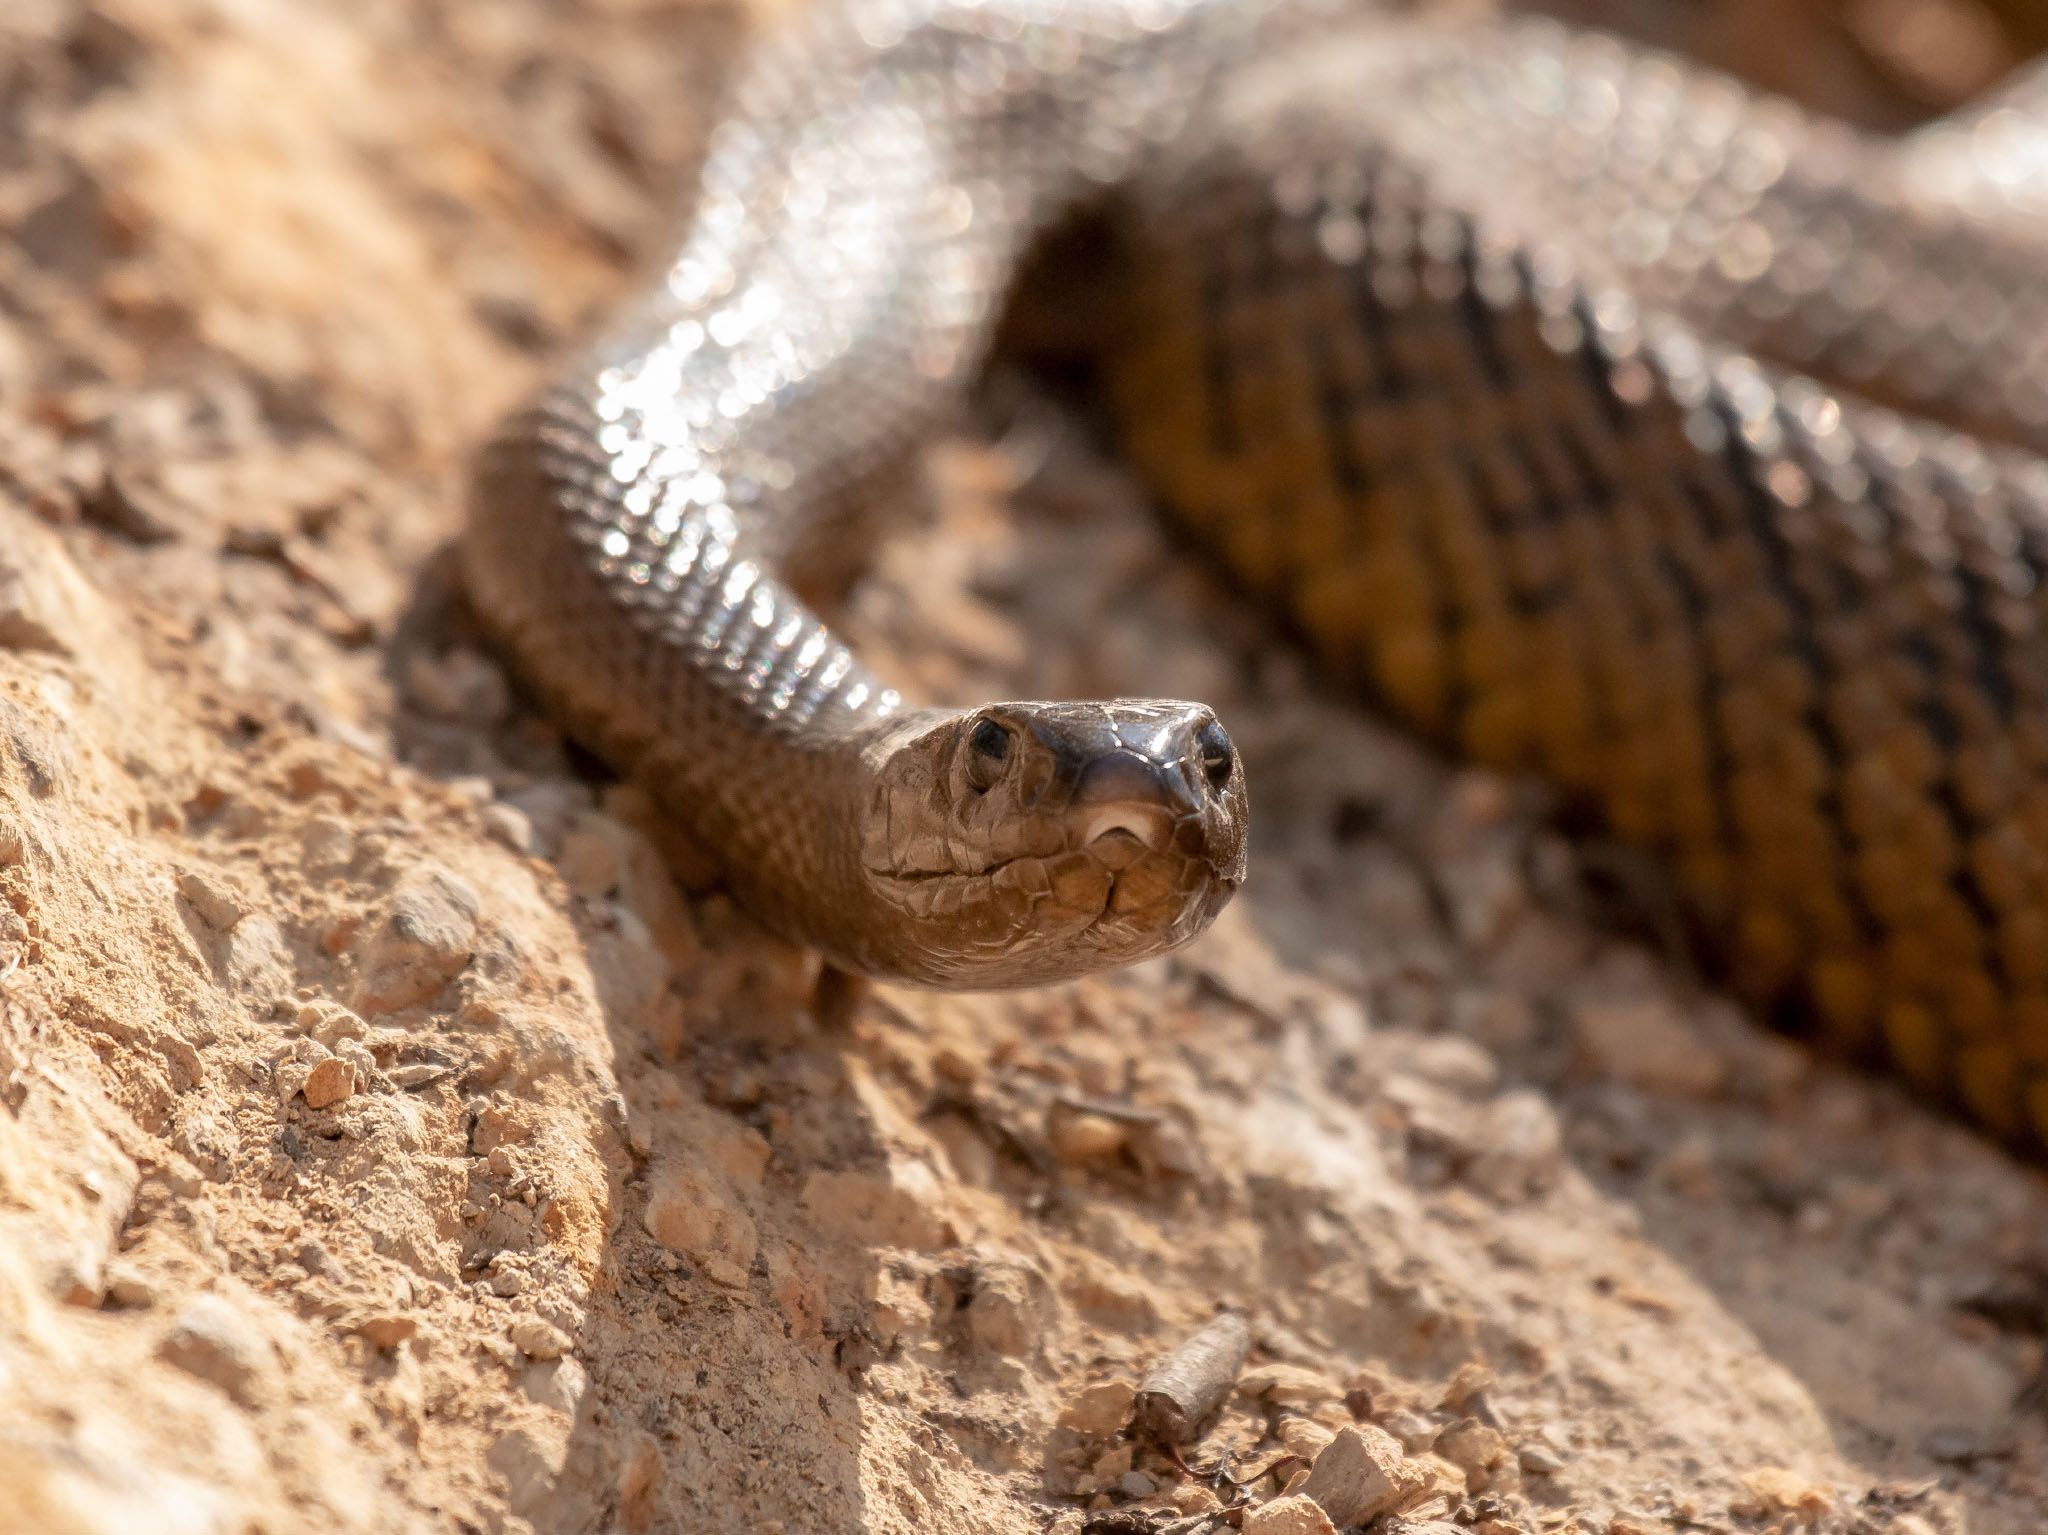 Medium close up of Inland taipan snake. This image is from Killer Snakes. [Photo of the day - March 2021]